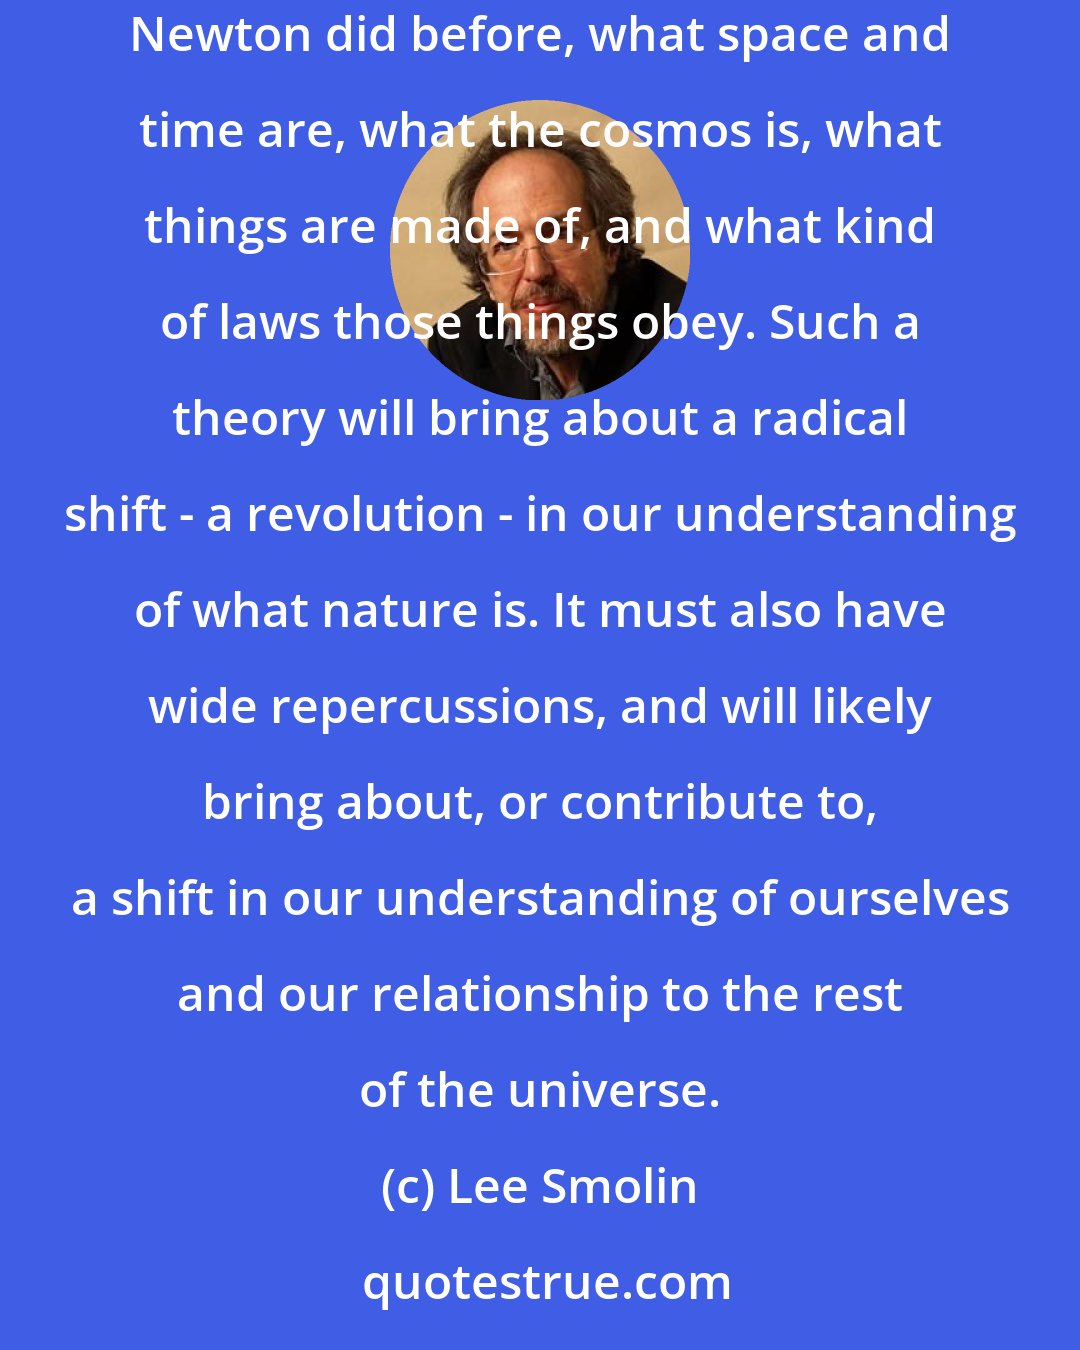 Lee Smolin: A successful unification of quantum theory and relativity would necessarily be a theory of the universe as a whole. It would tell us, as Aristotle and Newton did before, what space and time are, what the cosmos is, what things are made of, and what kind of laws those things obey. Such a theory will bring about a radical shift - a revolution - in our understanding of what nature is. It must also have wide repercussions, and will likely bring about, or contribute to, a shift in our understanding of ourselves and our relationship to the rest of the universe.